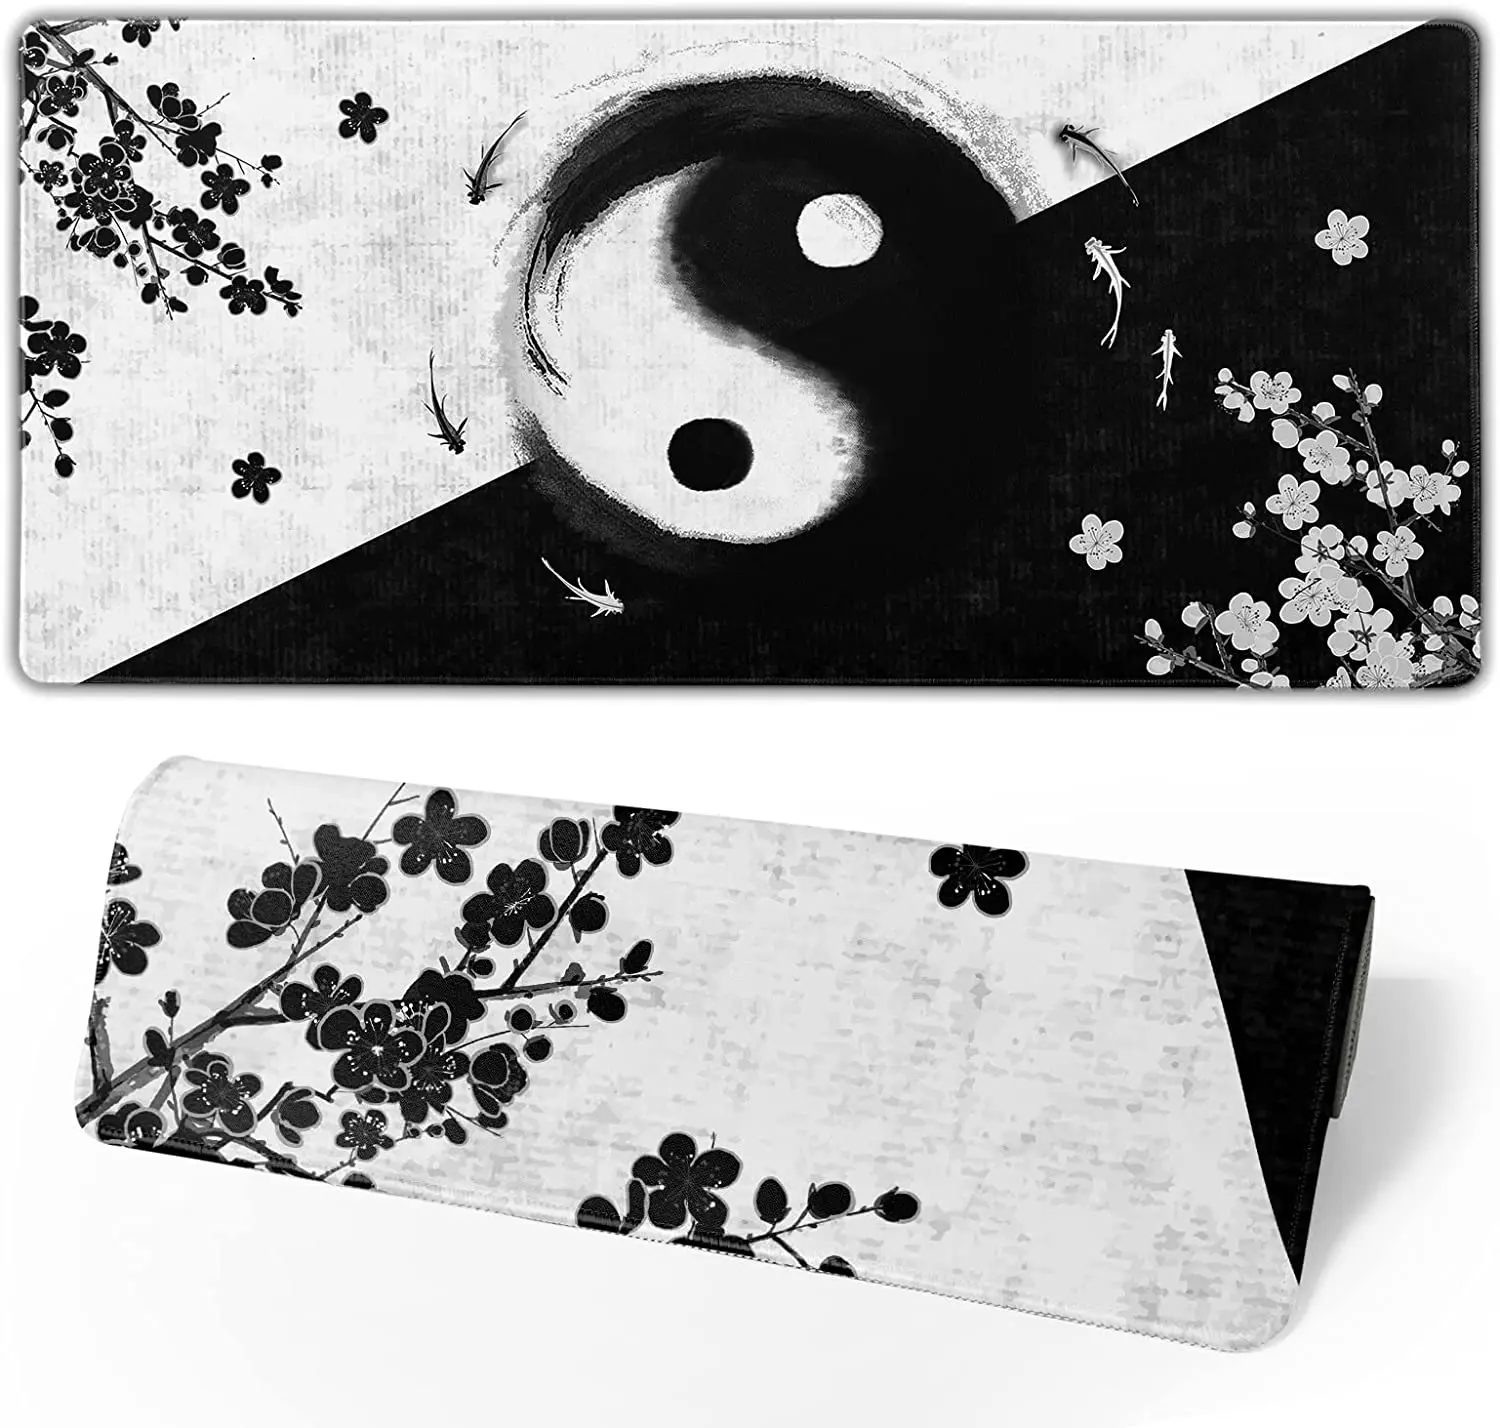 

Black White Cherry Blossom Extended Stitched Edges Mousepad Keyboard Mat Full Desk Pad Long Large Rubber Mice Pad 35.4×15.7